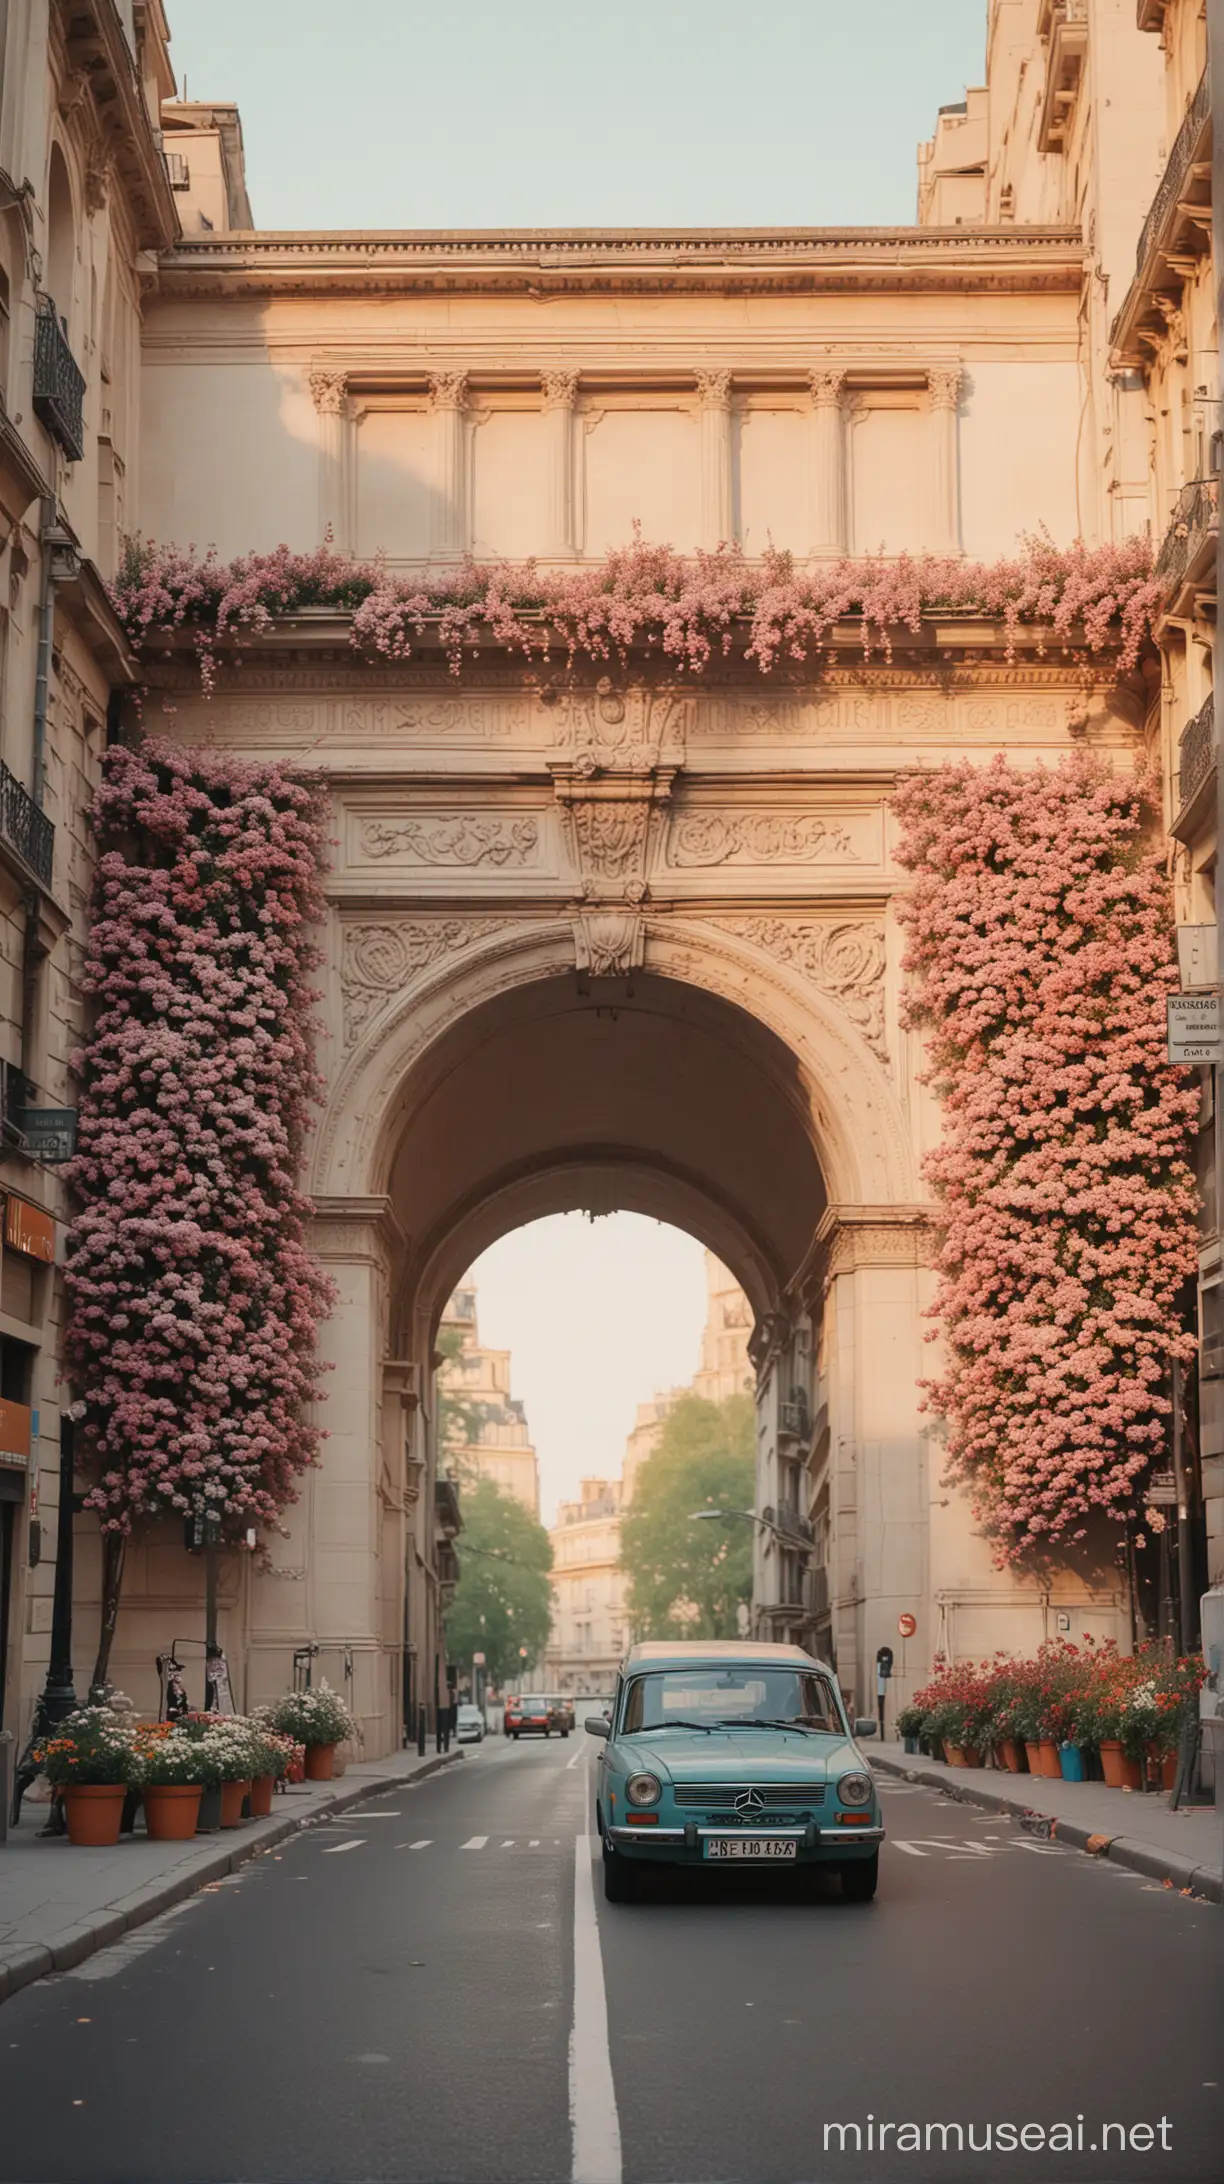 the triumphal arch in paris. trafic and people in pastel color close, cars in pastel colors with flowers out of the windows. pastel colors. . in the style of laura makabresku, pastel tone color palette, gustave courbet, miwa komatsu, colorful animation stills, soft, muted palette, intricate floral arrangements, in the style of naturalistic poses, vacation dadcore, youthful energy, a coolexpression, analog film, super detail, dreamy lofi photography, colorful,  shot on fujifilm XT4, sunset, backlit, photography, expansive, awe-inspiring, breathtaking, bright colors,  sharp focus, good exposure, misty, wide-angle
